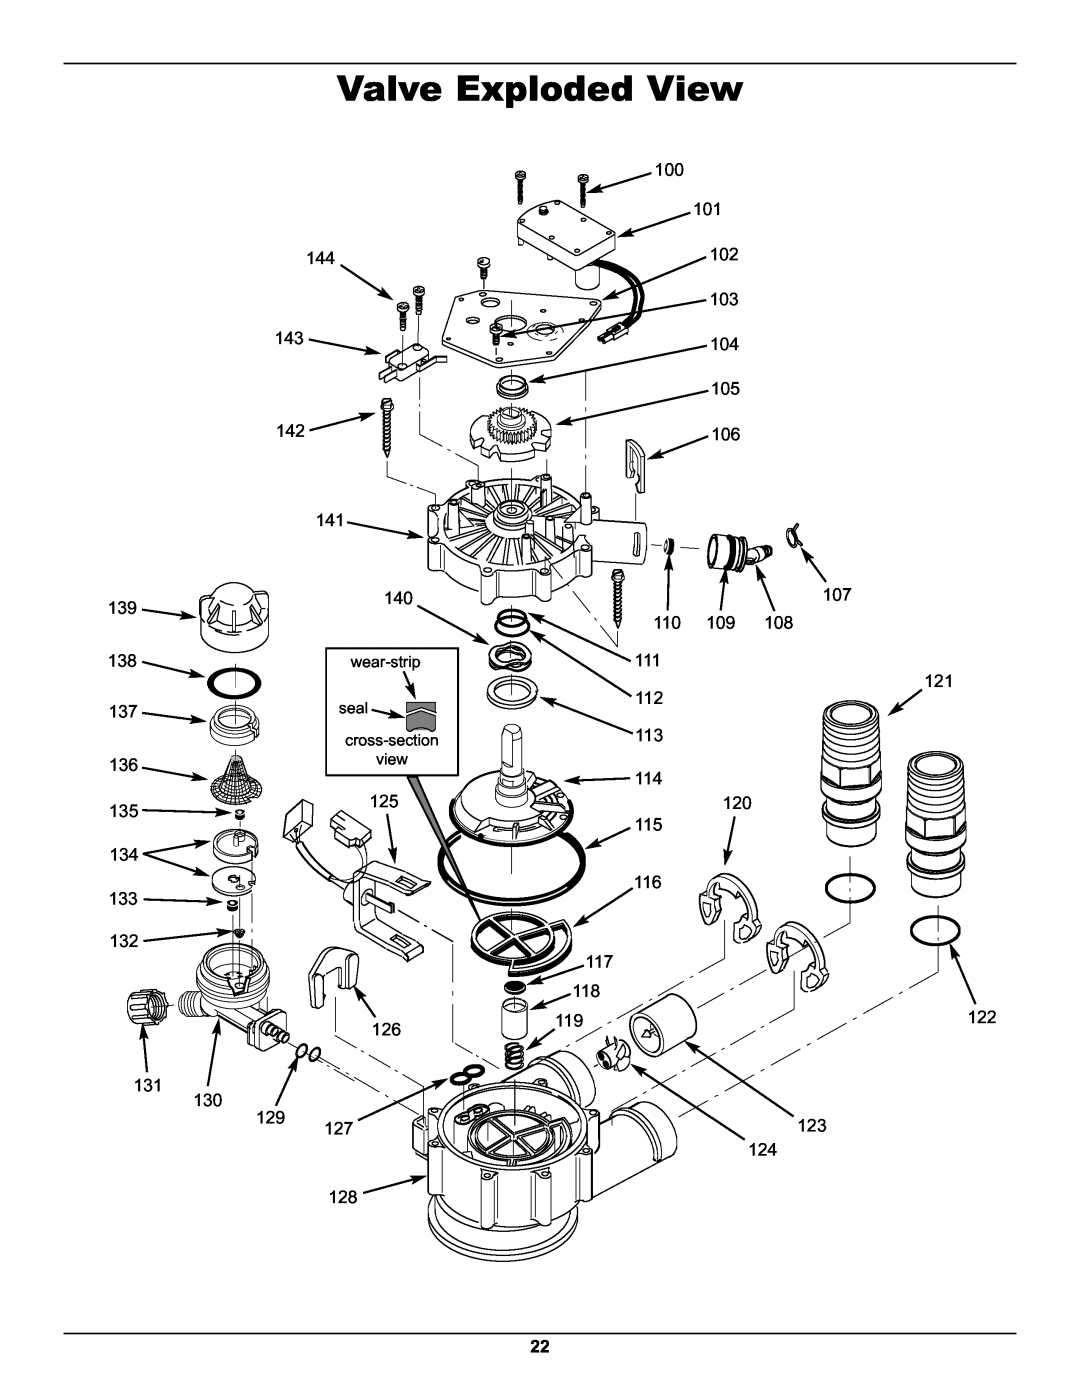 Whirlpool WHES40 operation manual Valve Exploded View, seal, cross-section, view 